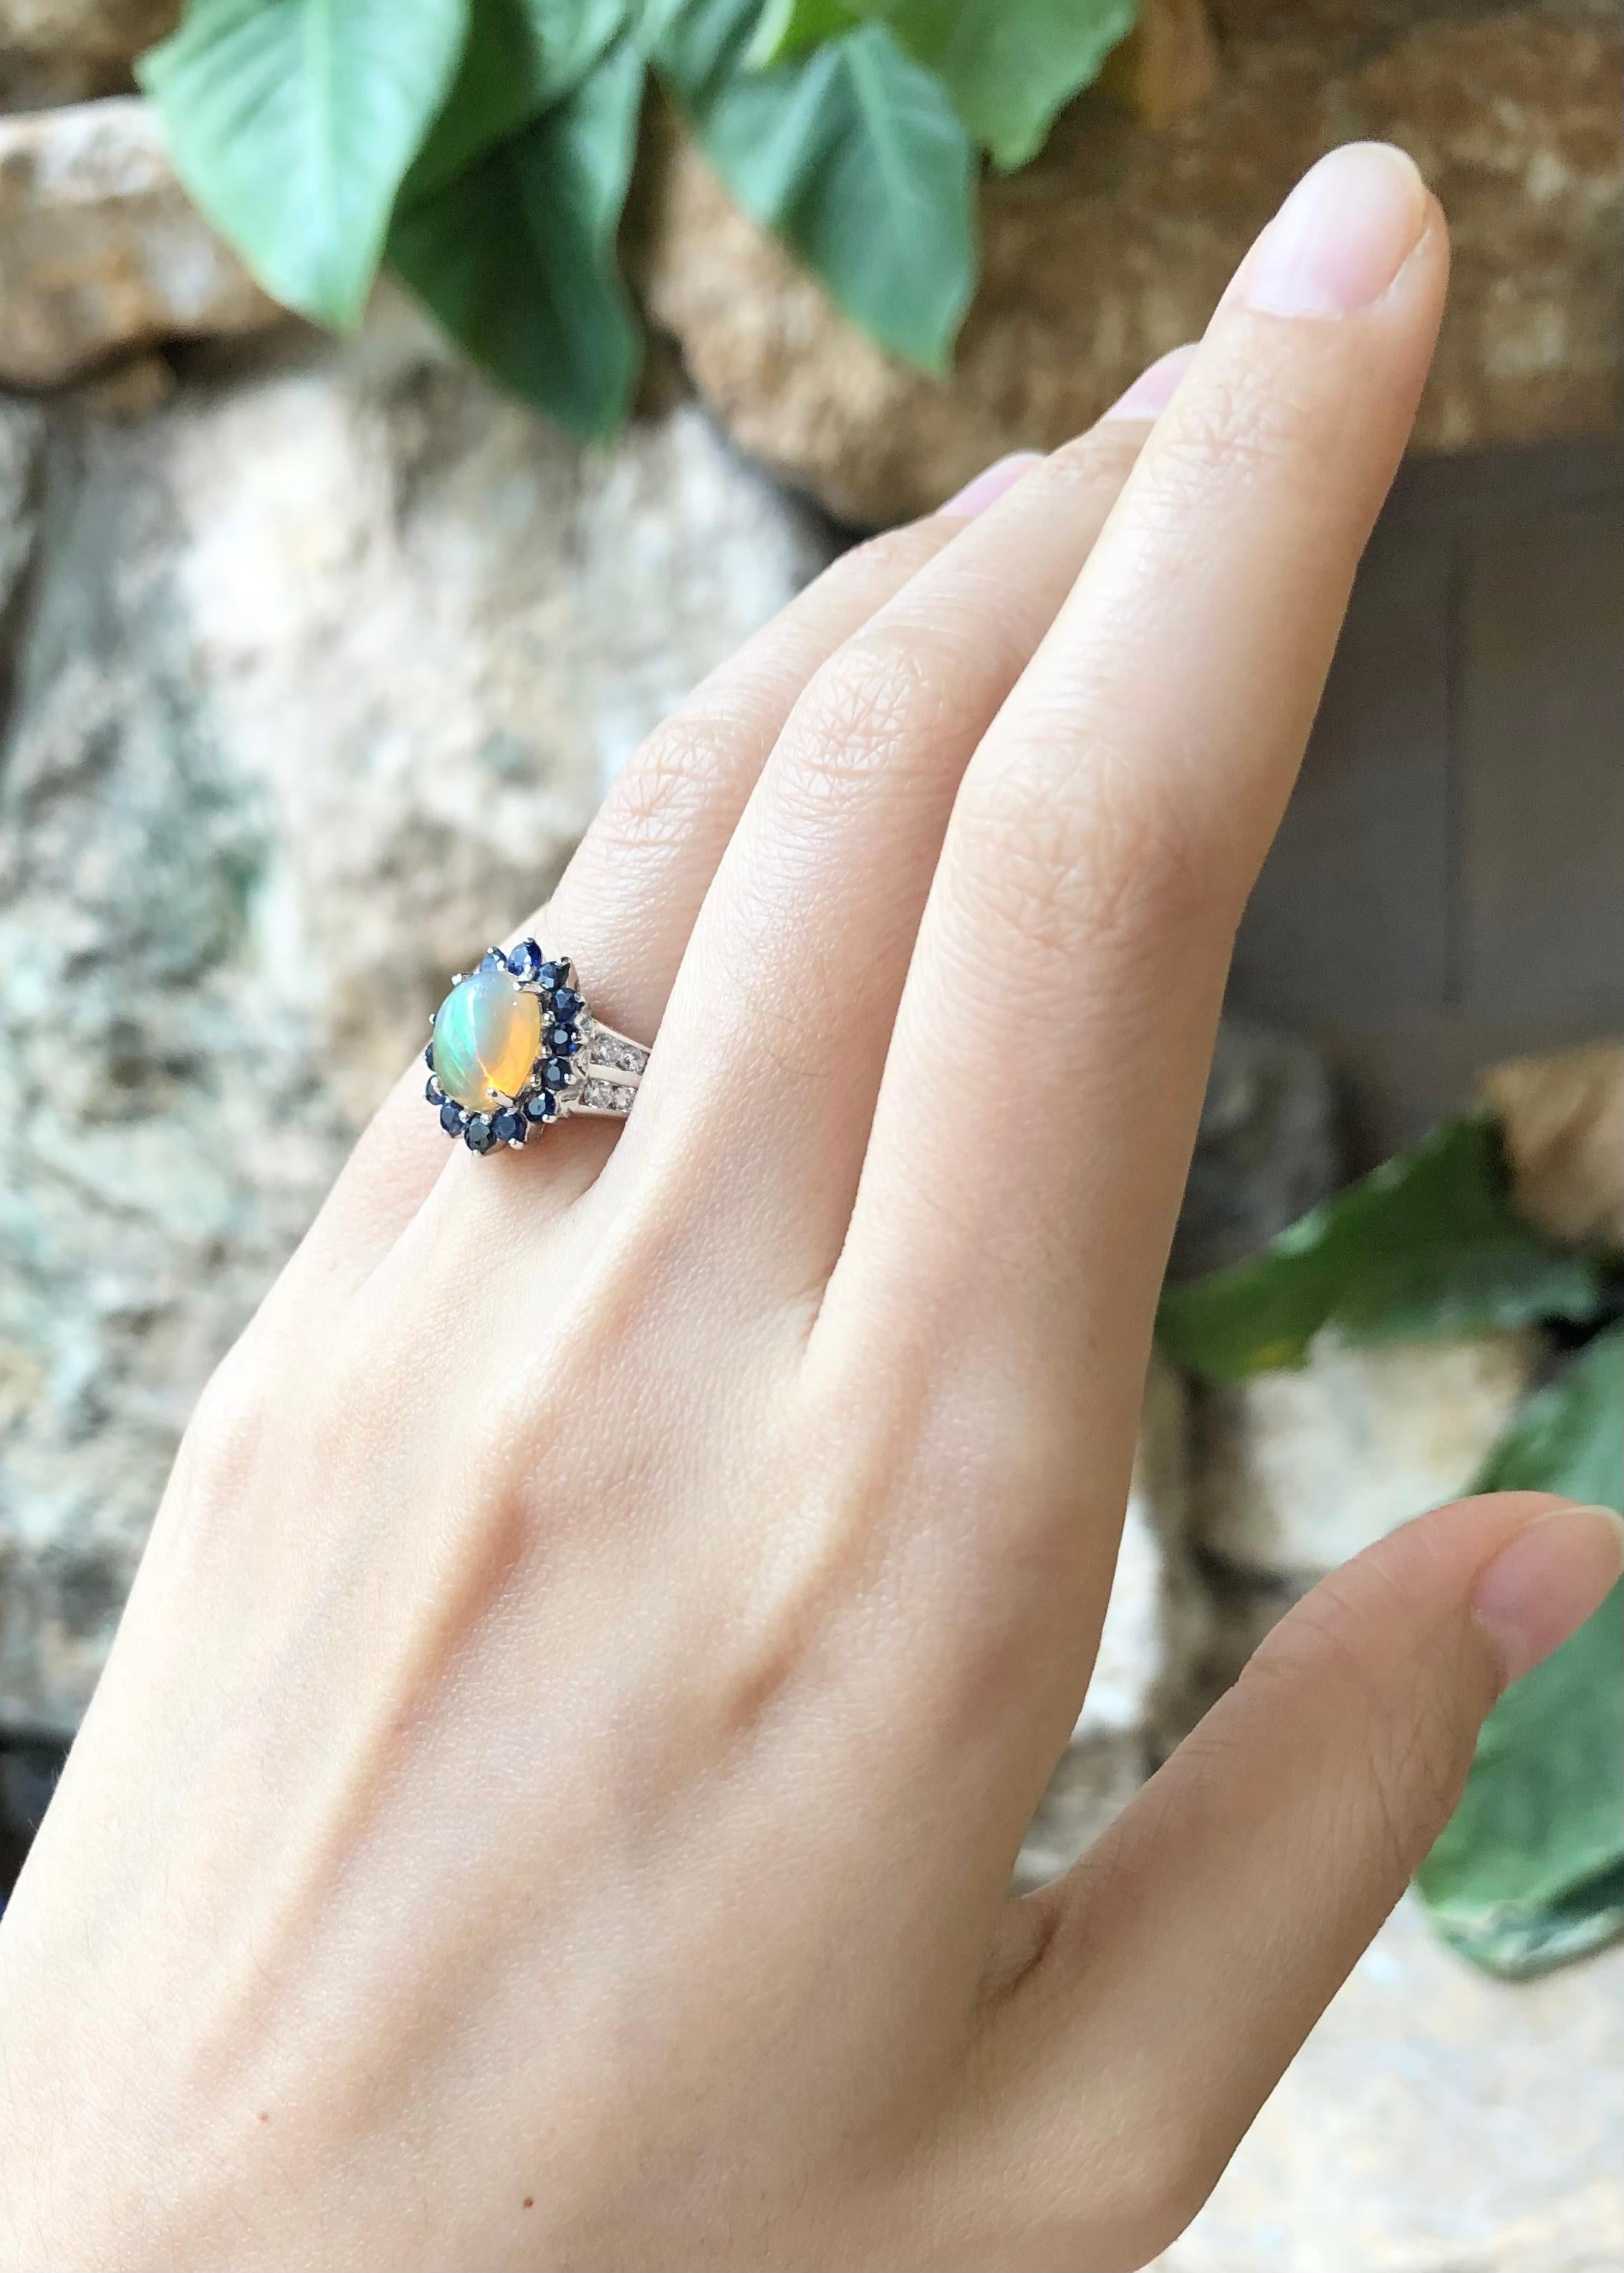 Opal, Blue Sapphire with Cubic Zirconia Ring set in Silver Settings

Width:  1.0 cm 
Length: 1.4 cm
Ring Size: 49
Total Weight: 3.82 grams

*Please note that the silver setting is plated with rhodium to promote shine and help prevent oxidation. 